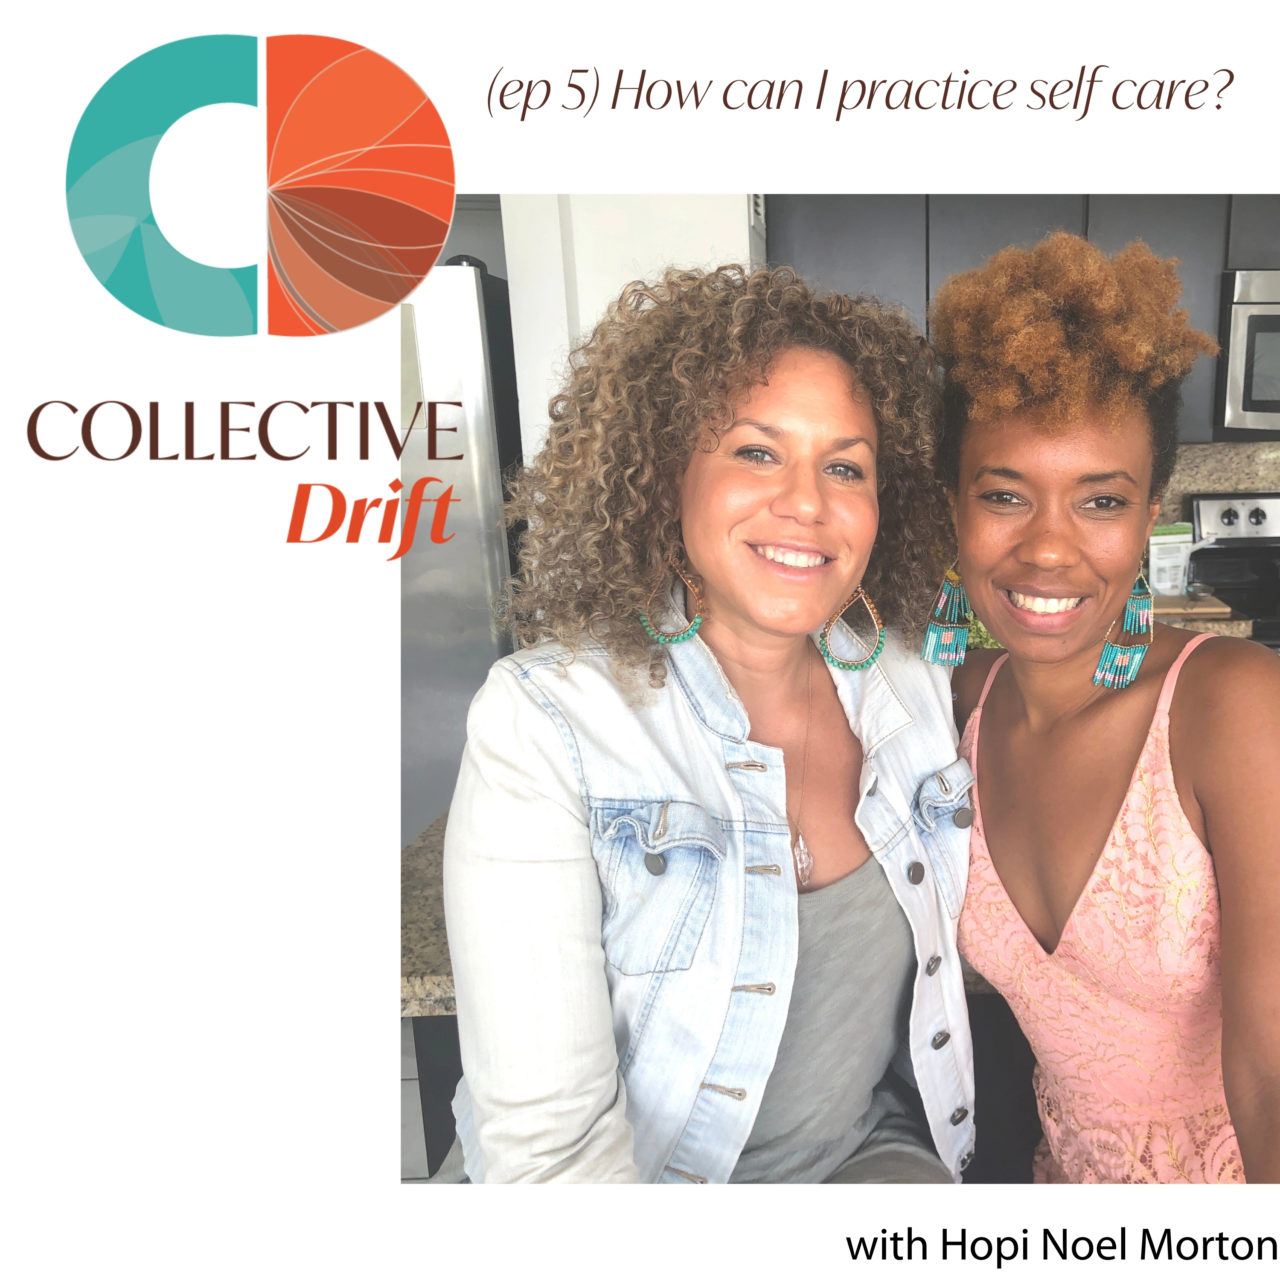 (ep 5) How can I practice self care? An interview with Hopi Noel Morton